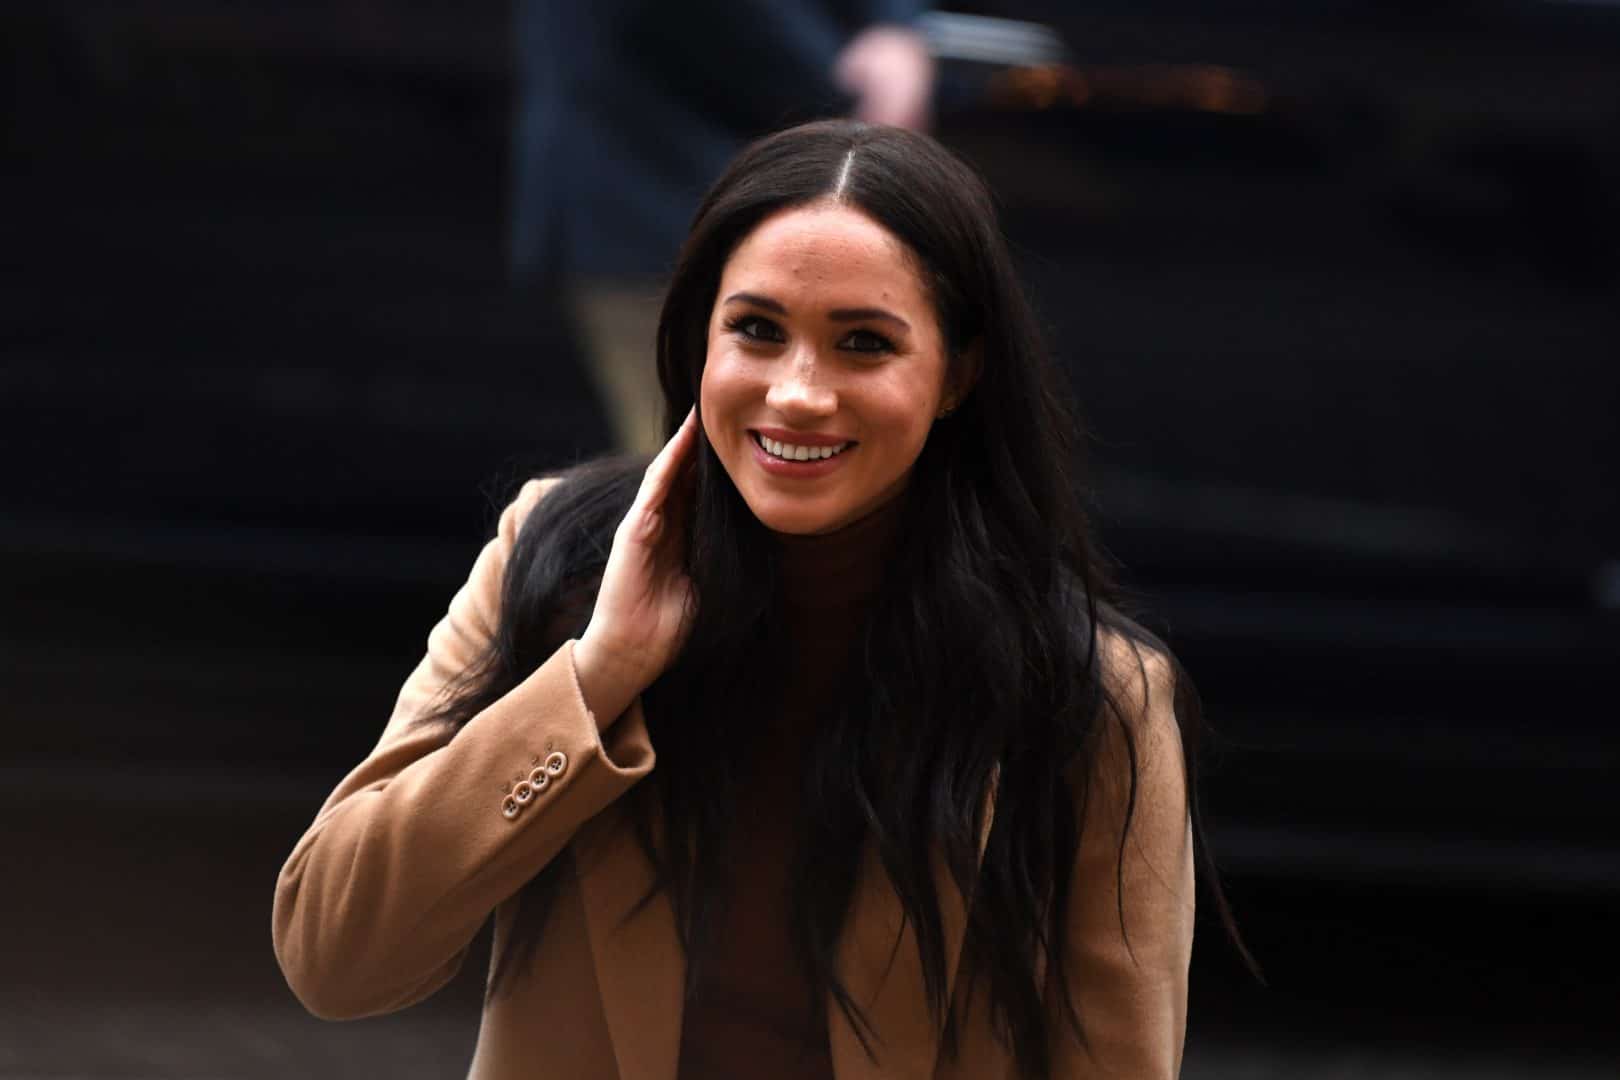 Mail on Sunday could call on Meghan Markle’s father to testify against her in privacy case